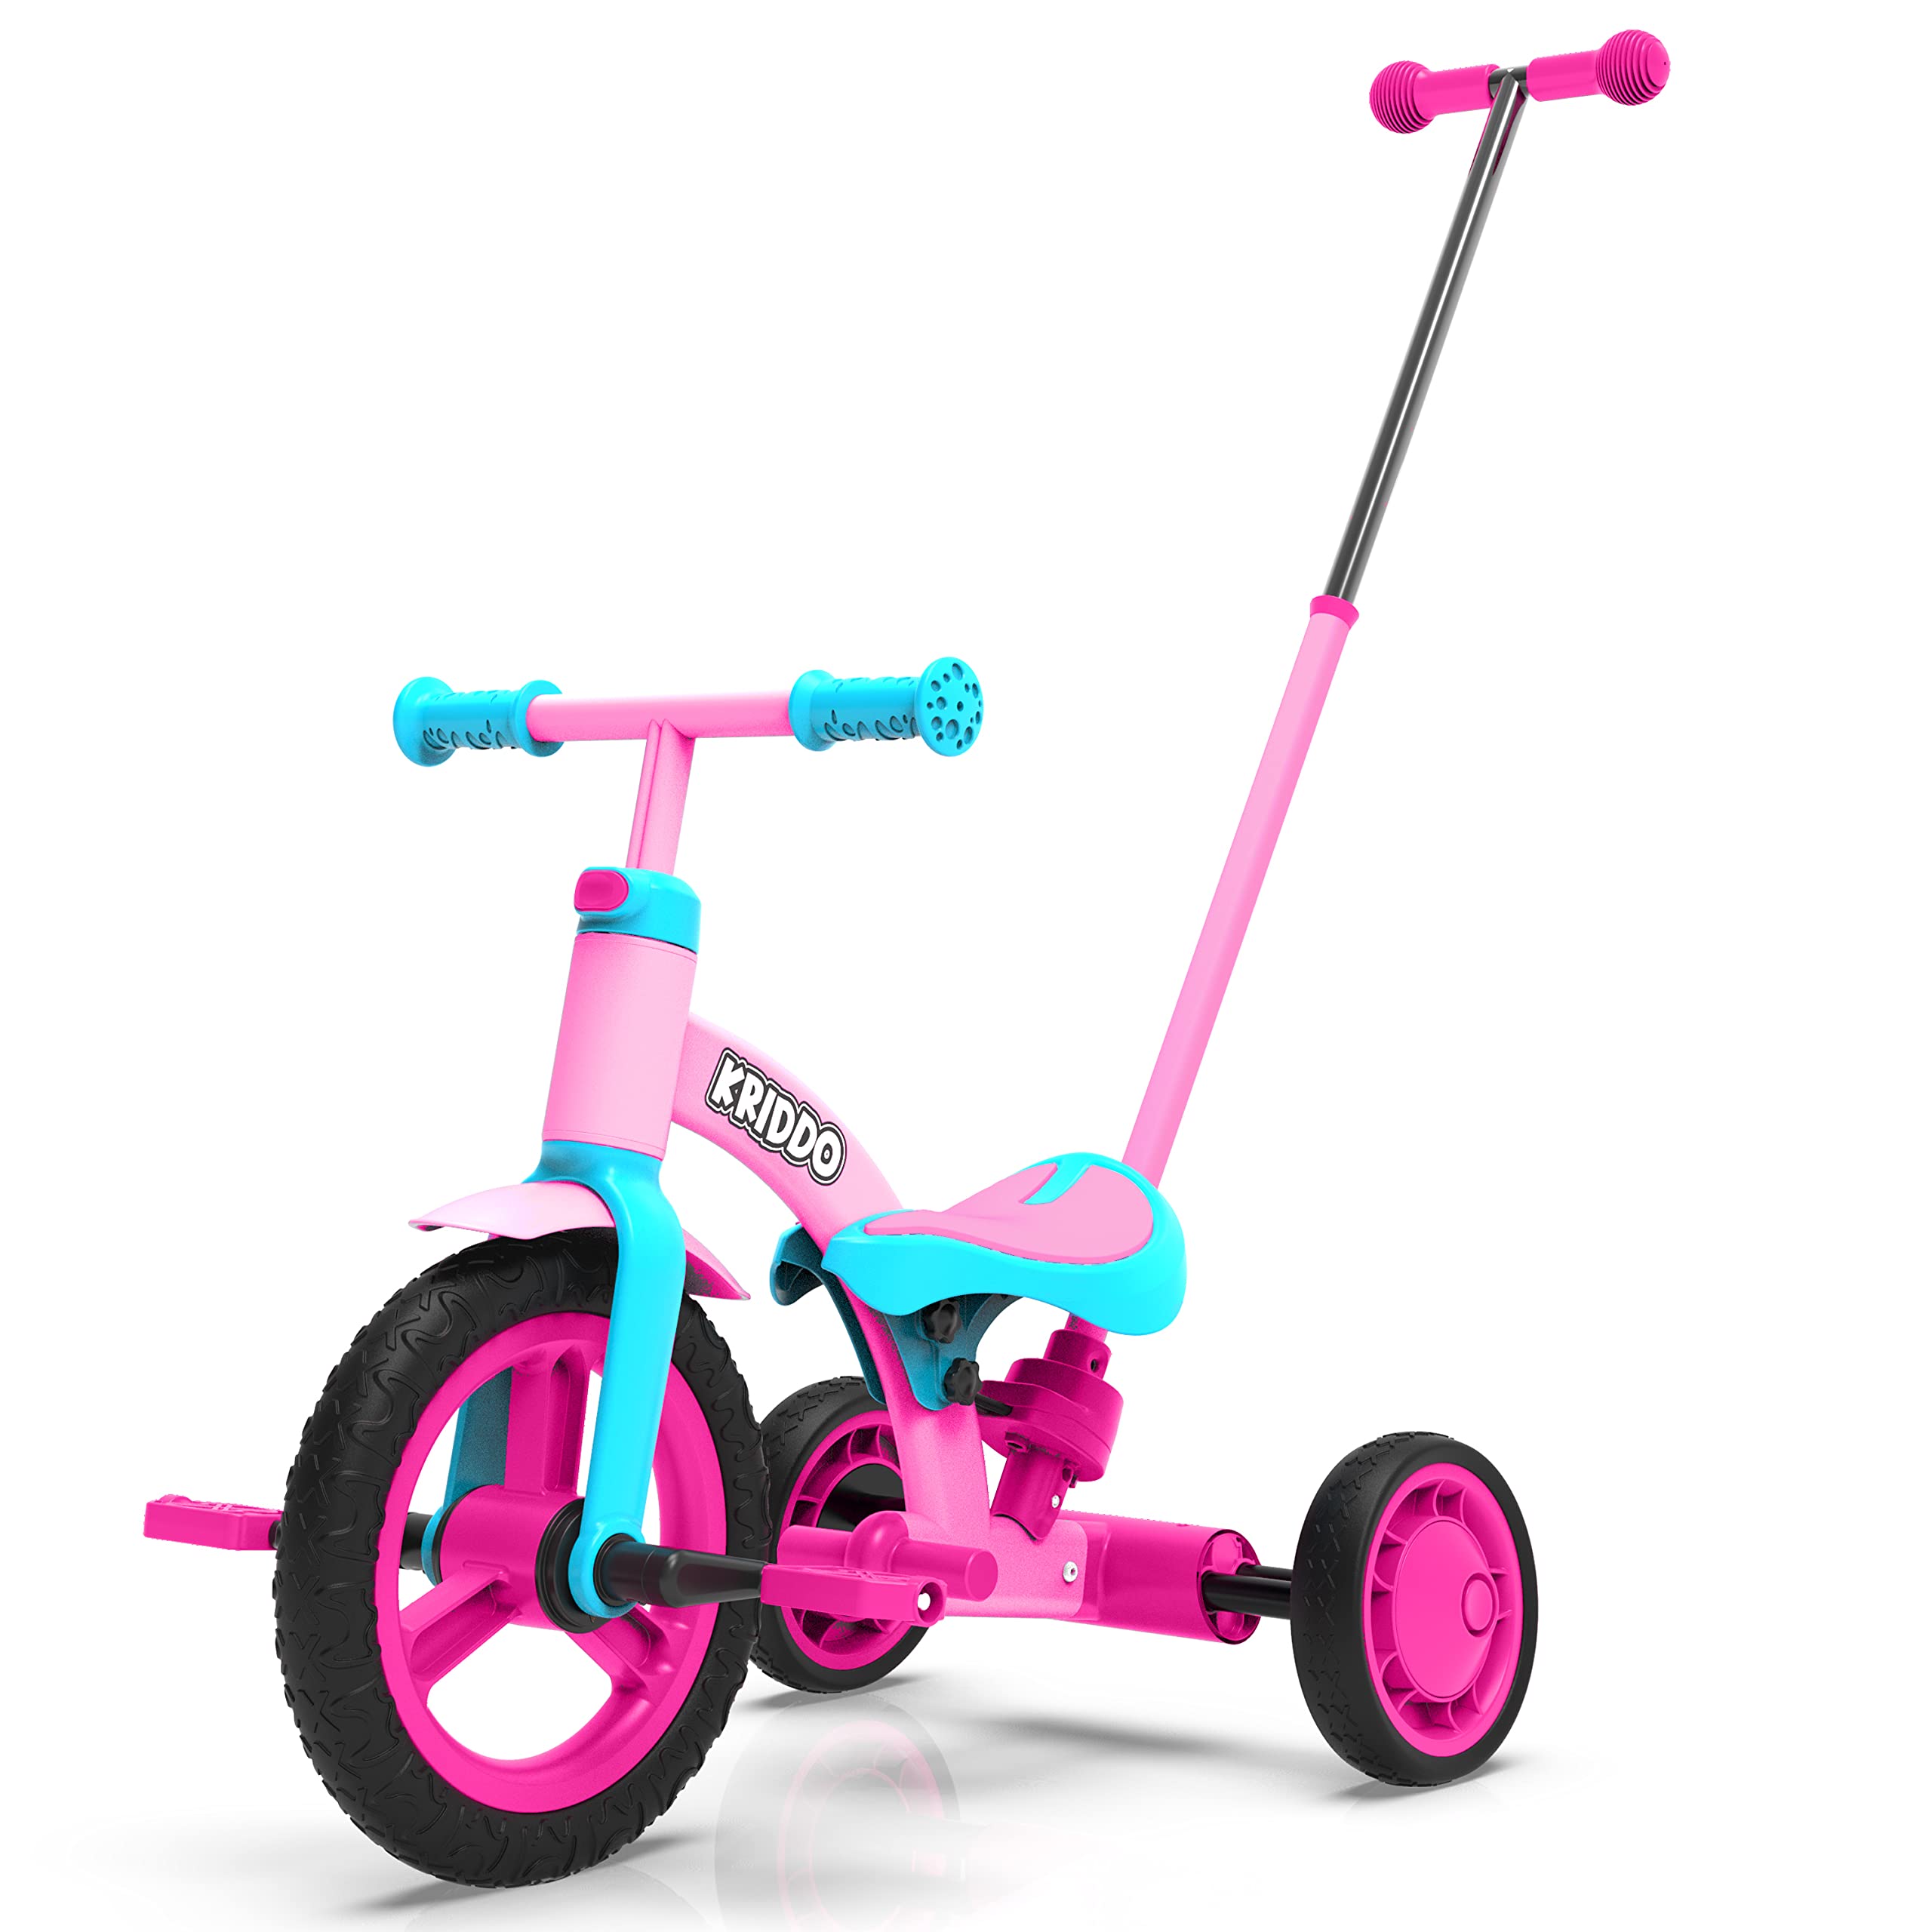 Push Tricycle with Handle - Toddler Push Tricycle